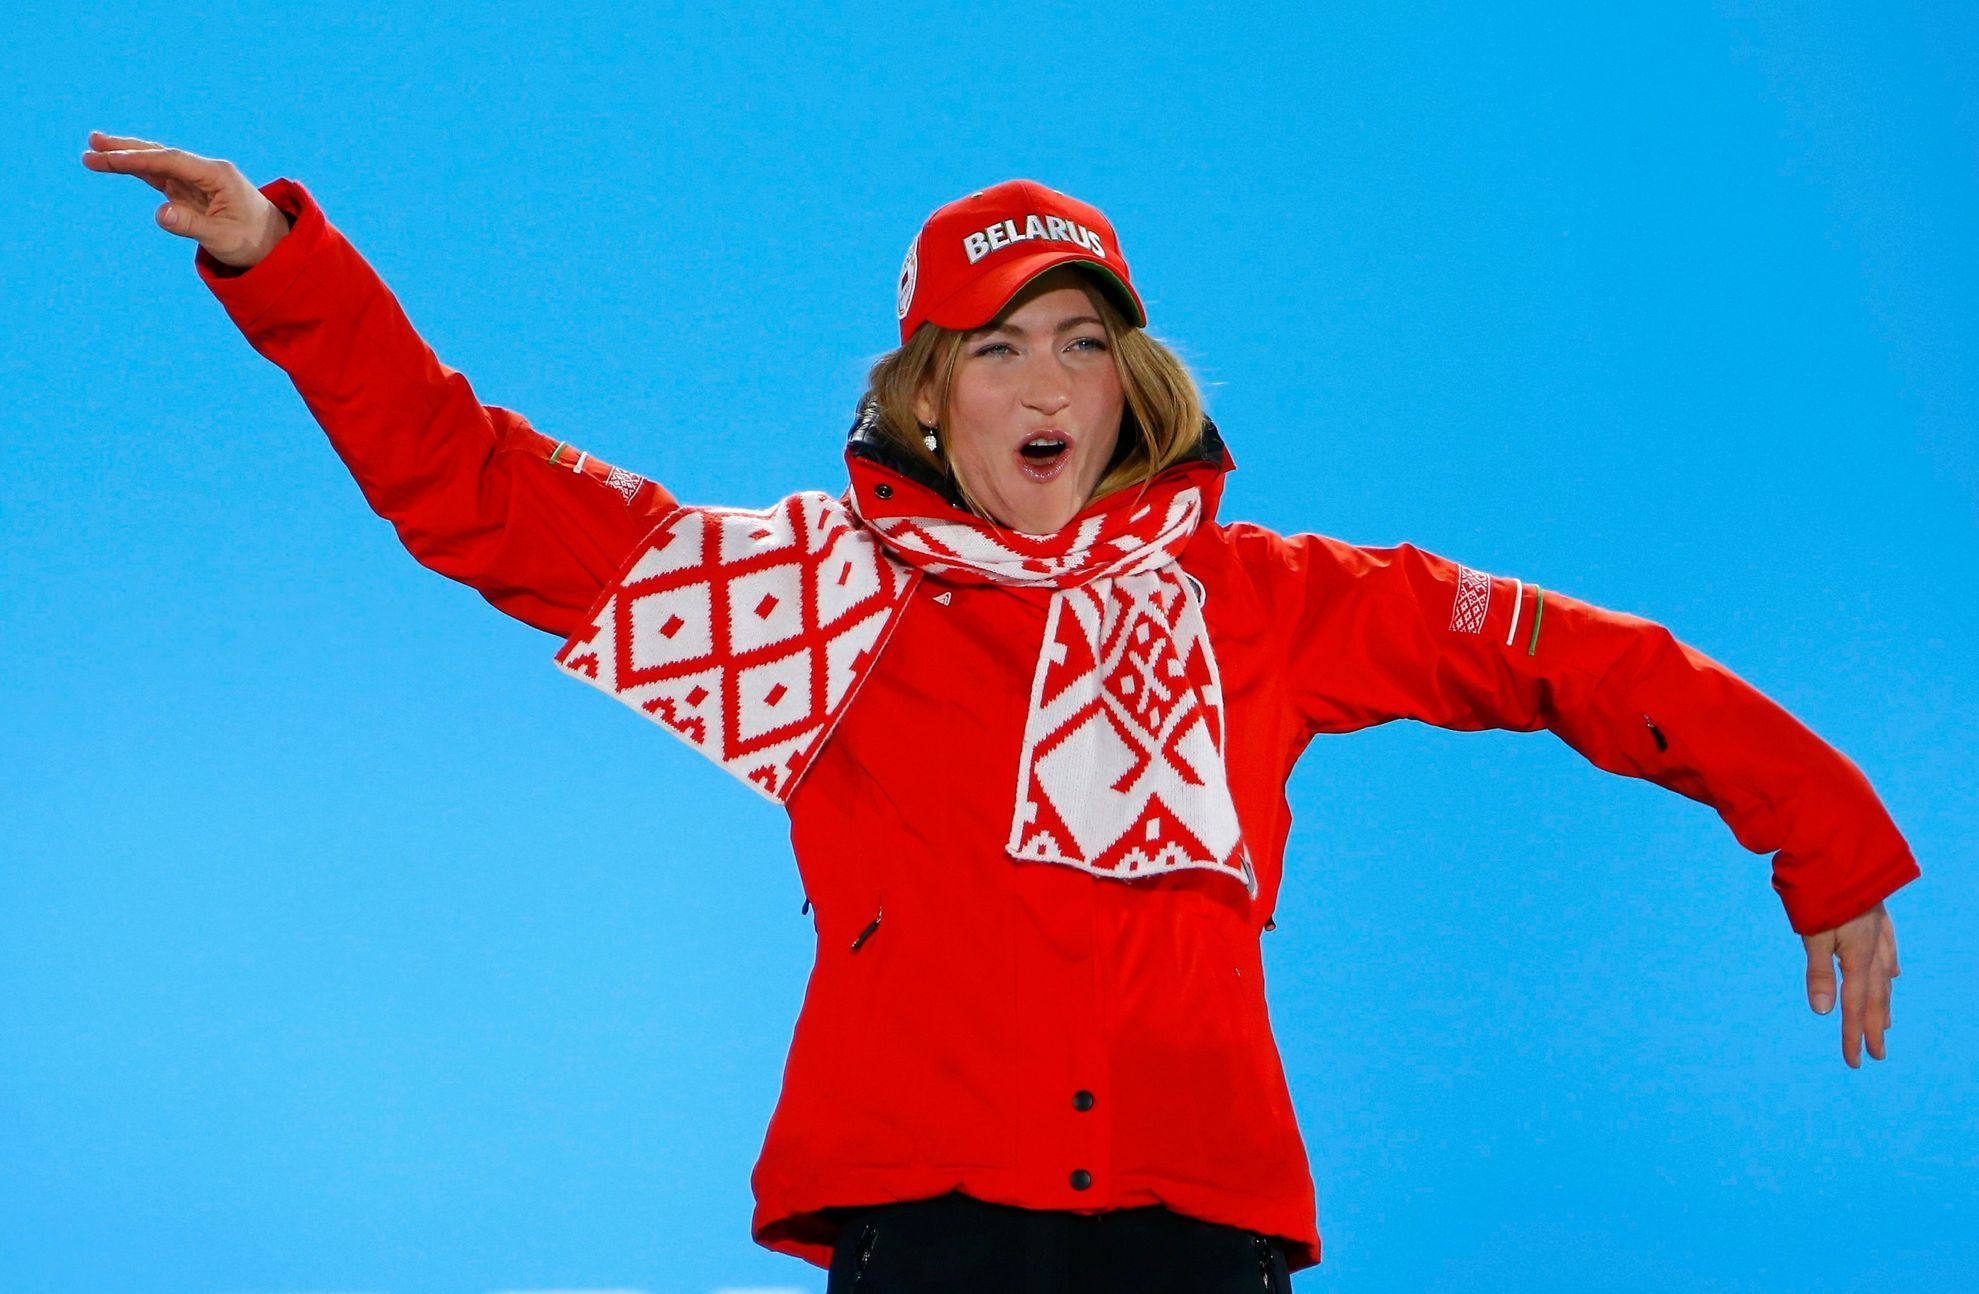 Domracheva celebrates during the victory ceremony for the women's biathlon individual 15 km event at the Sochi 2014 Winter Olympics in Sochi